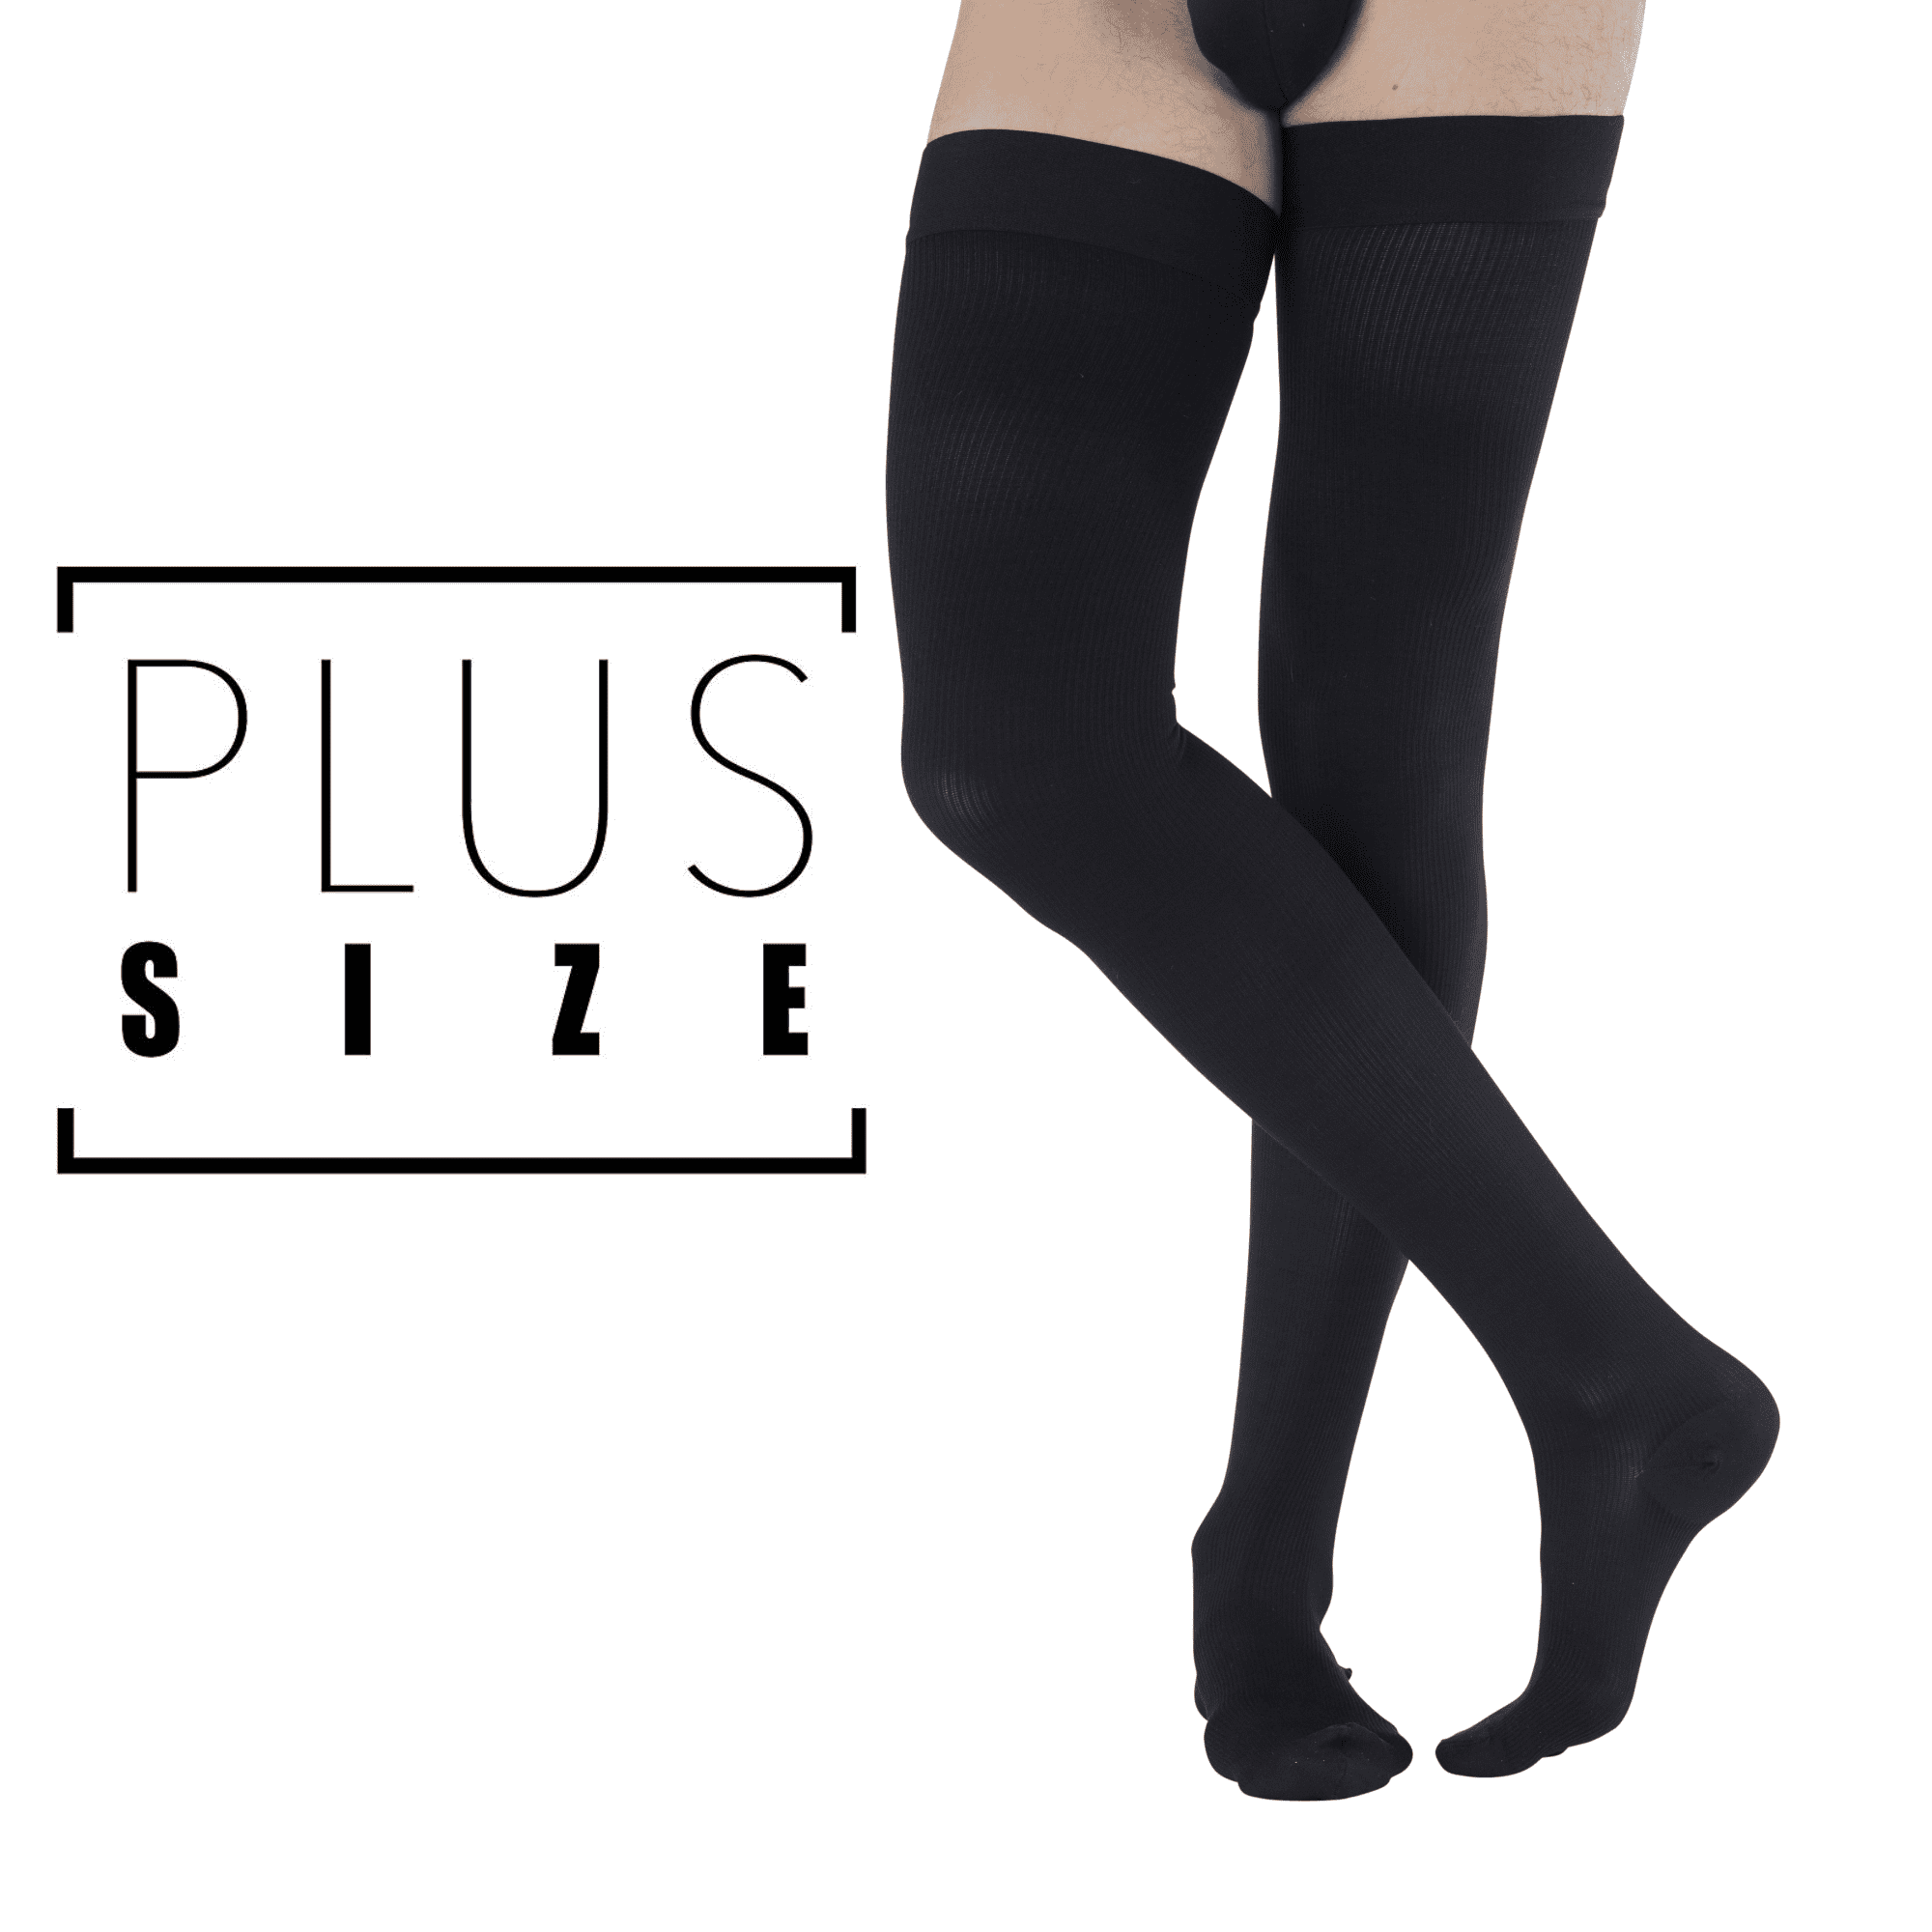 1 Pair Stockings Compression Varicose Vein Legs Over Knee Thick Socks Thigh High